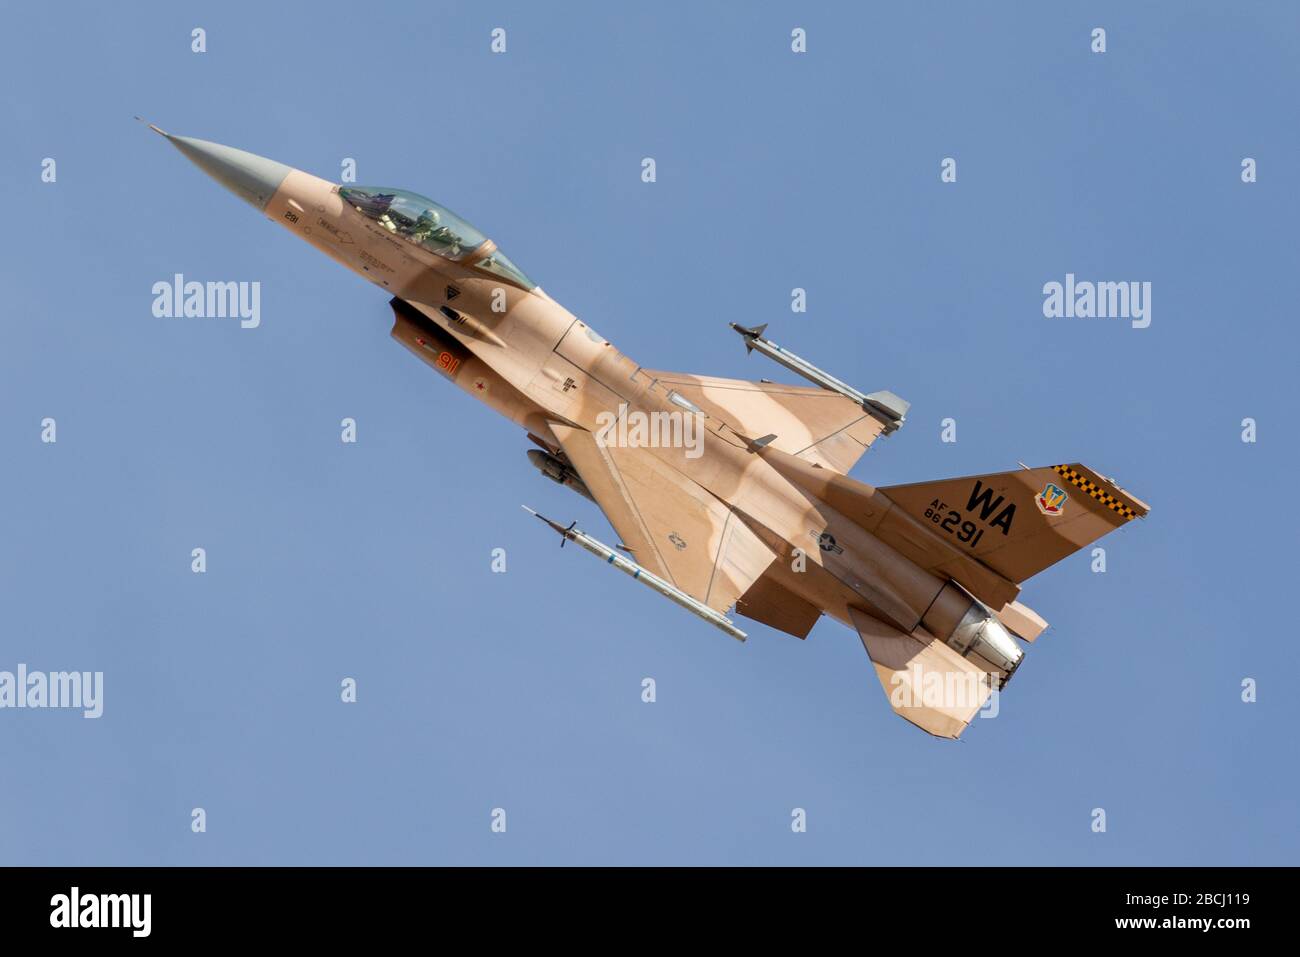 United States Air Force (USAF ) General Dynamics F-16 Fighting Falcon Fighter jet in Aggressor colour scheme at Nellis Air Force Base near Las Vegas Stock Photo